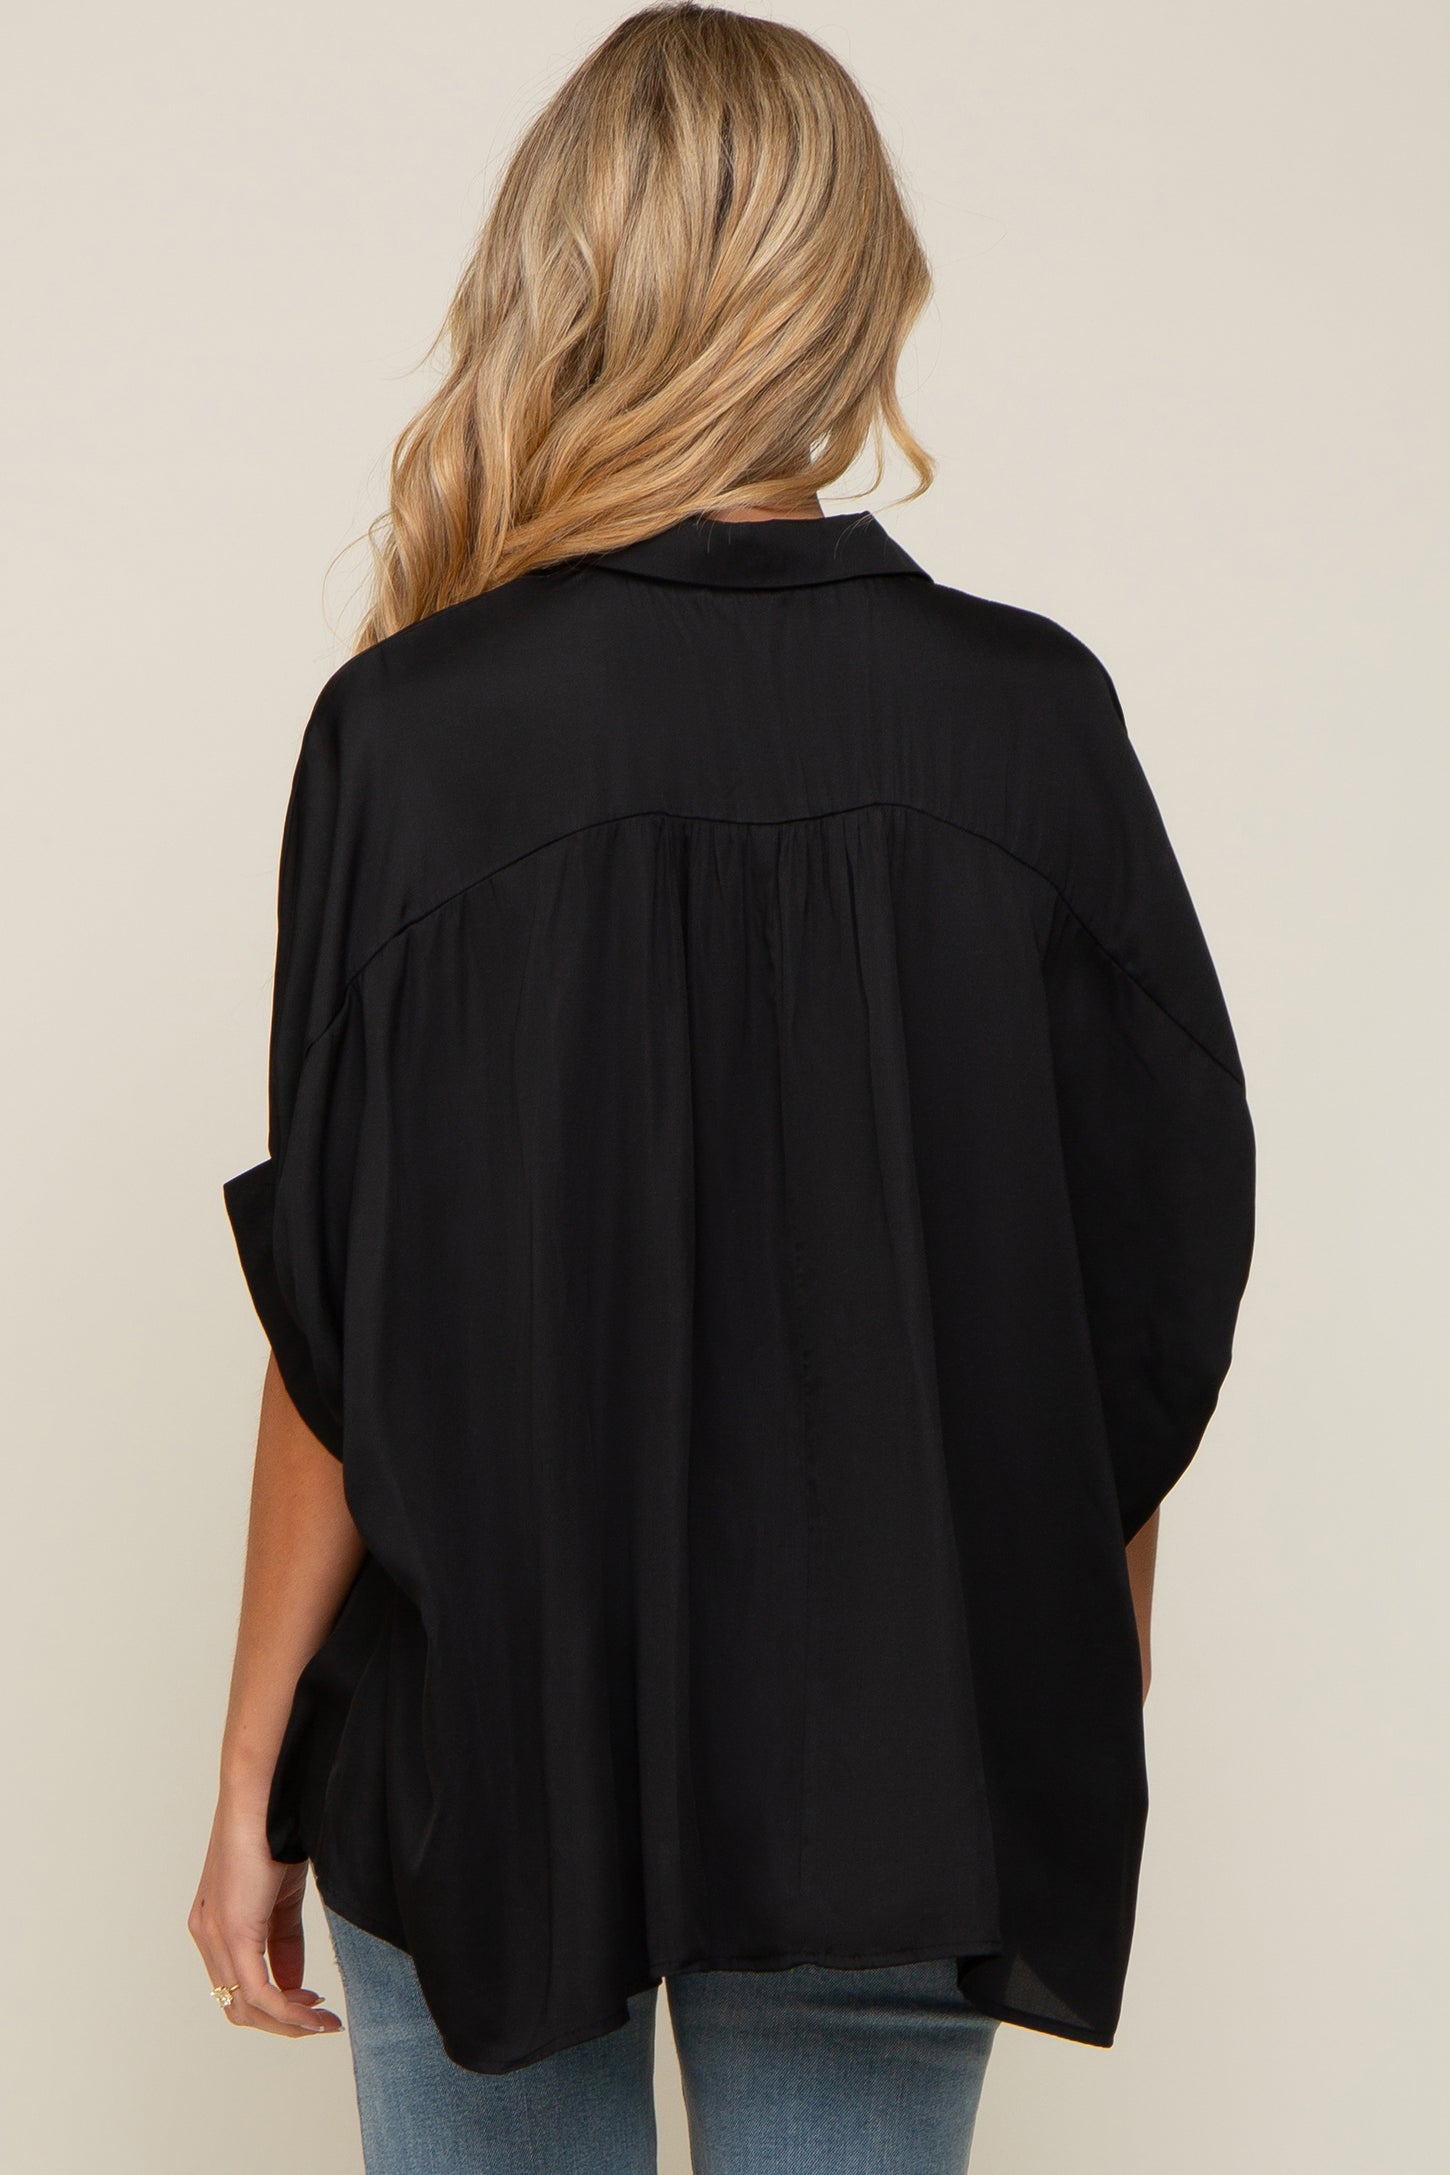 Black Oversized Button Down Maternity Blouse